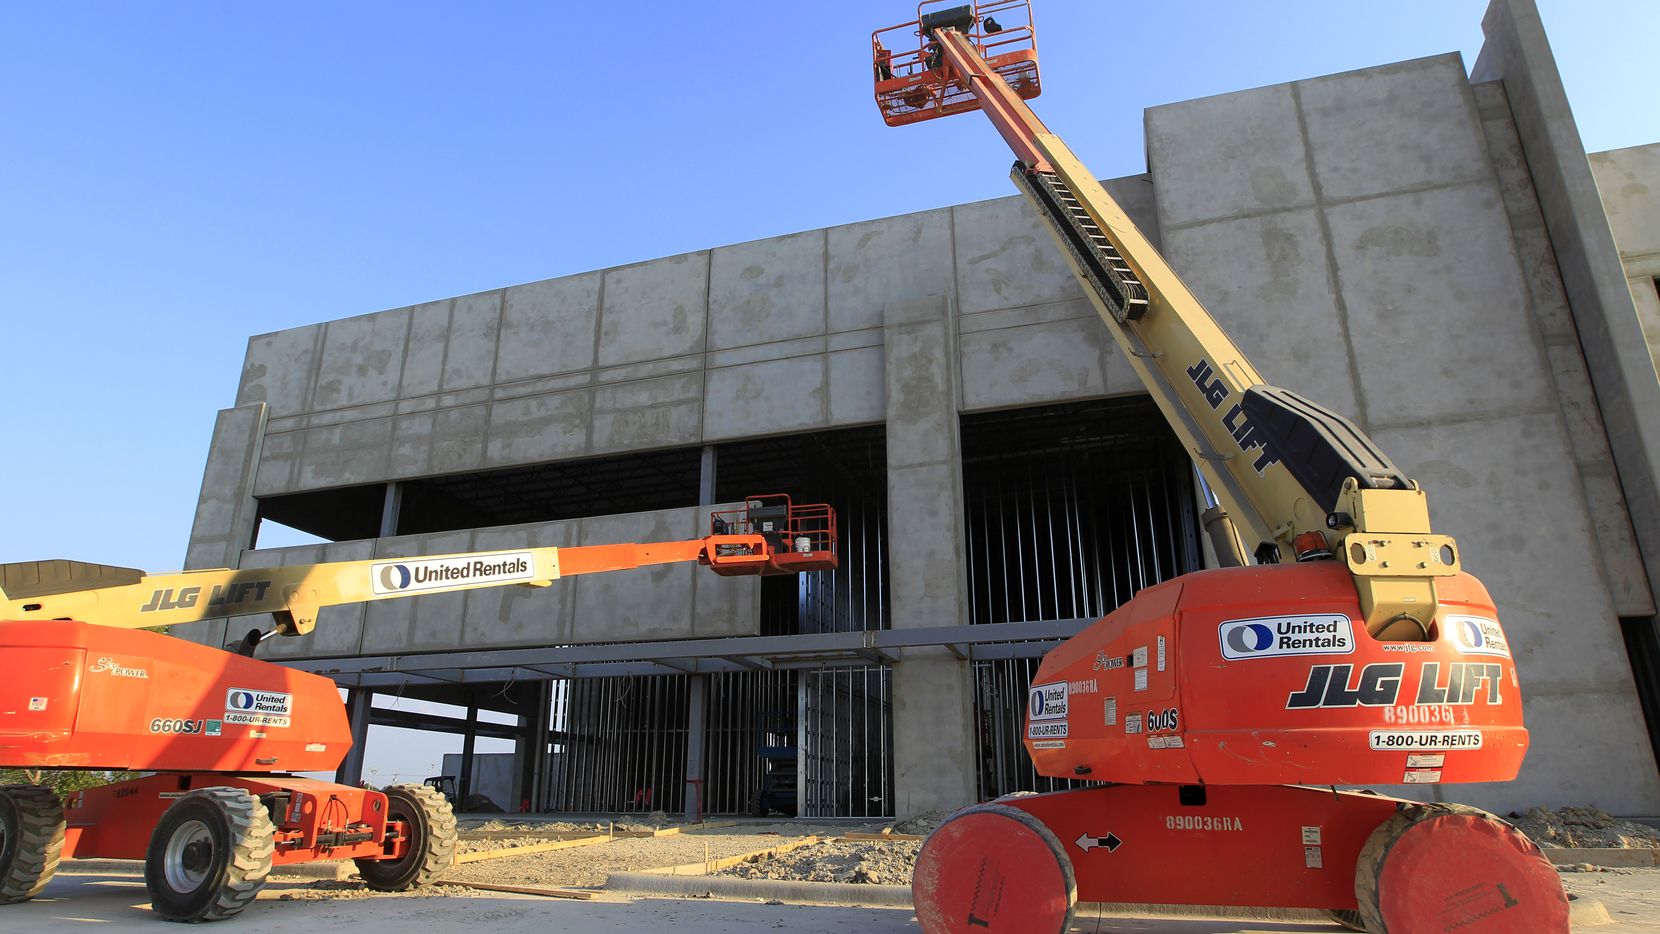 Almost 35 million square feet of warehouse space is being built in North Texas, according to...